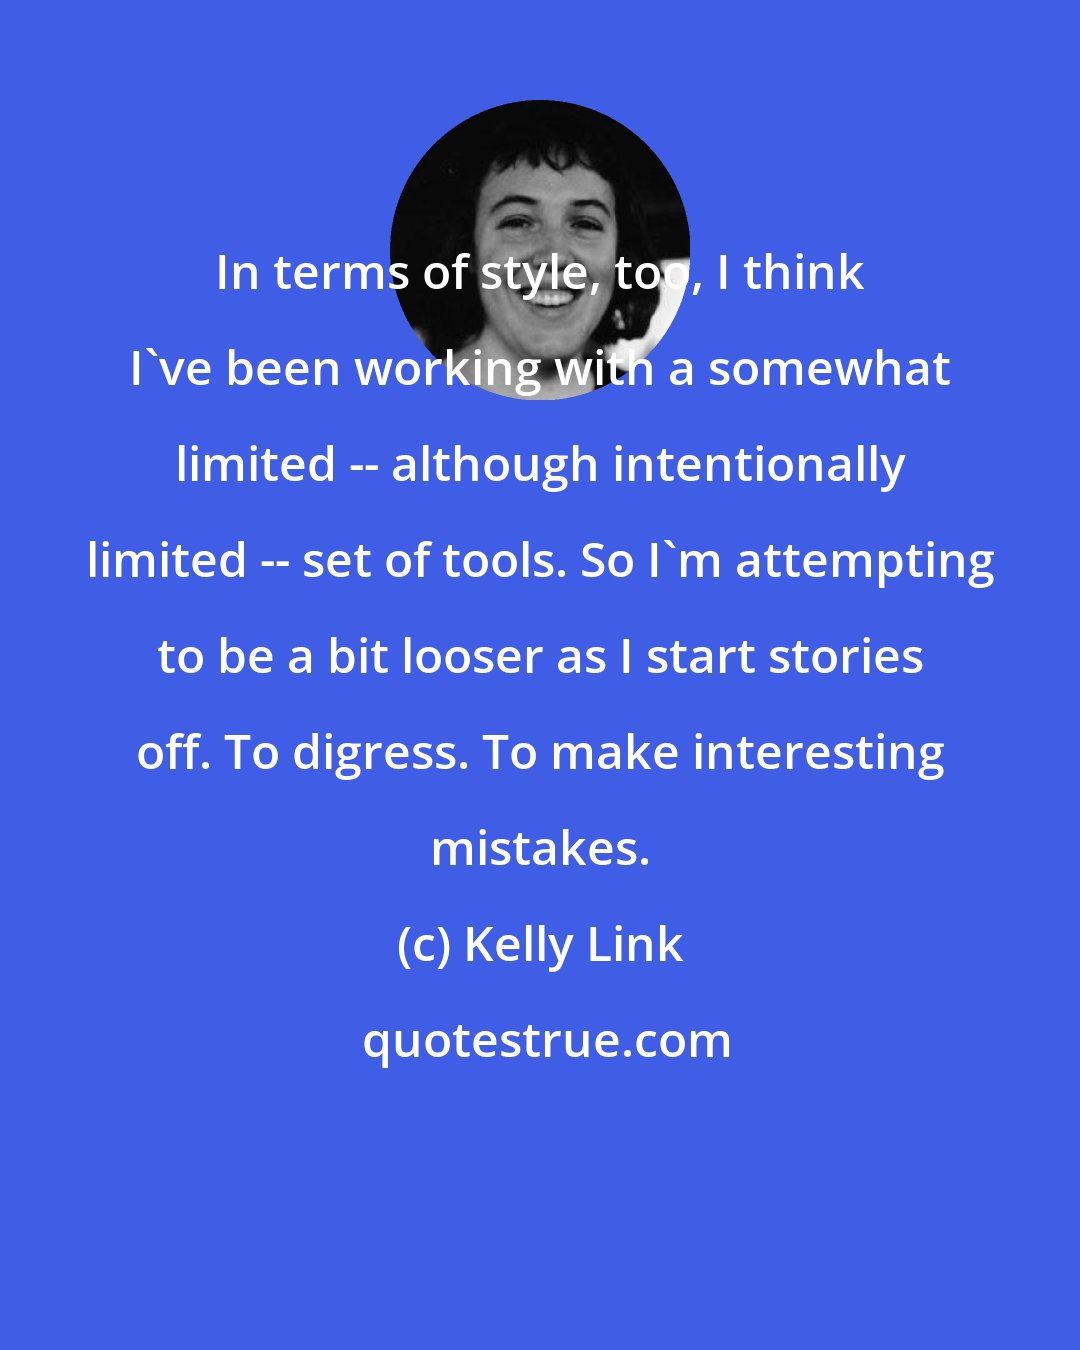 Kelly Link: In terms of style, too, I think I've been working with a somewhat limited -- although intentionally limited -- set of tools. So I'm attempting to be a bit looser as I start stories off. To digress. To make interesting mistakes.